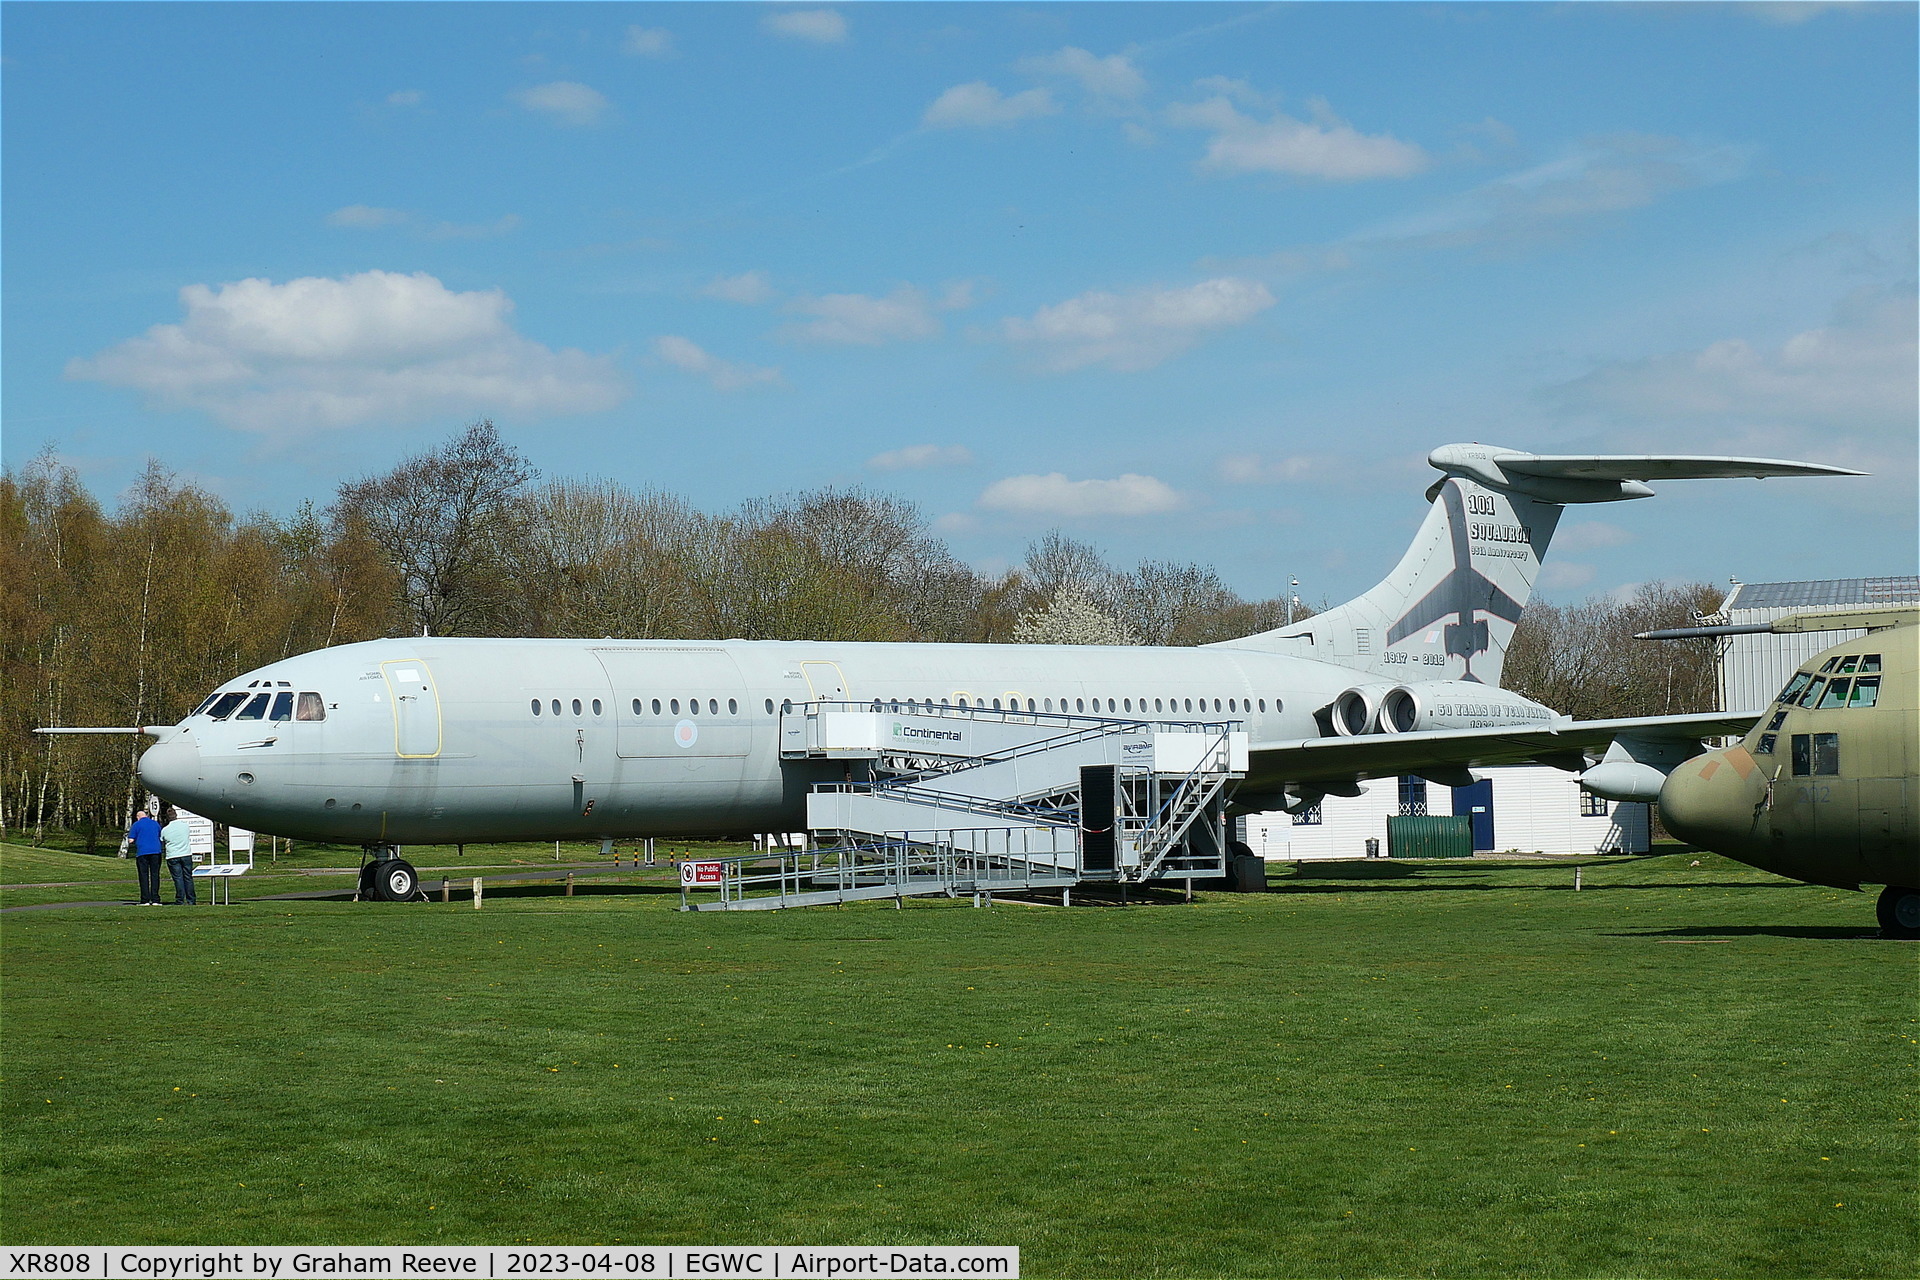 XR808, 1966 Vickers VC10 C.1 C/N 828, On display at the RAF Museum, Cosford.